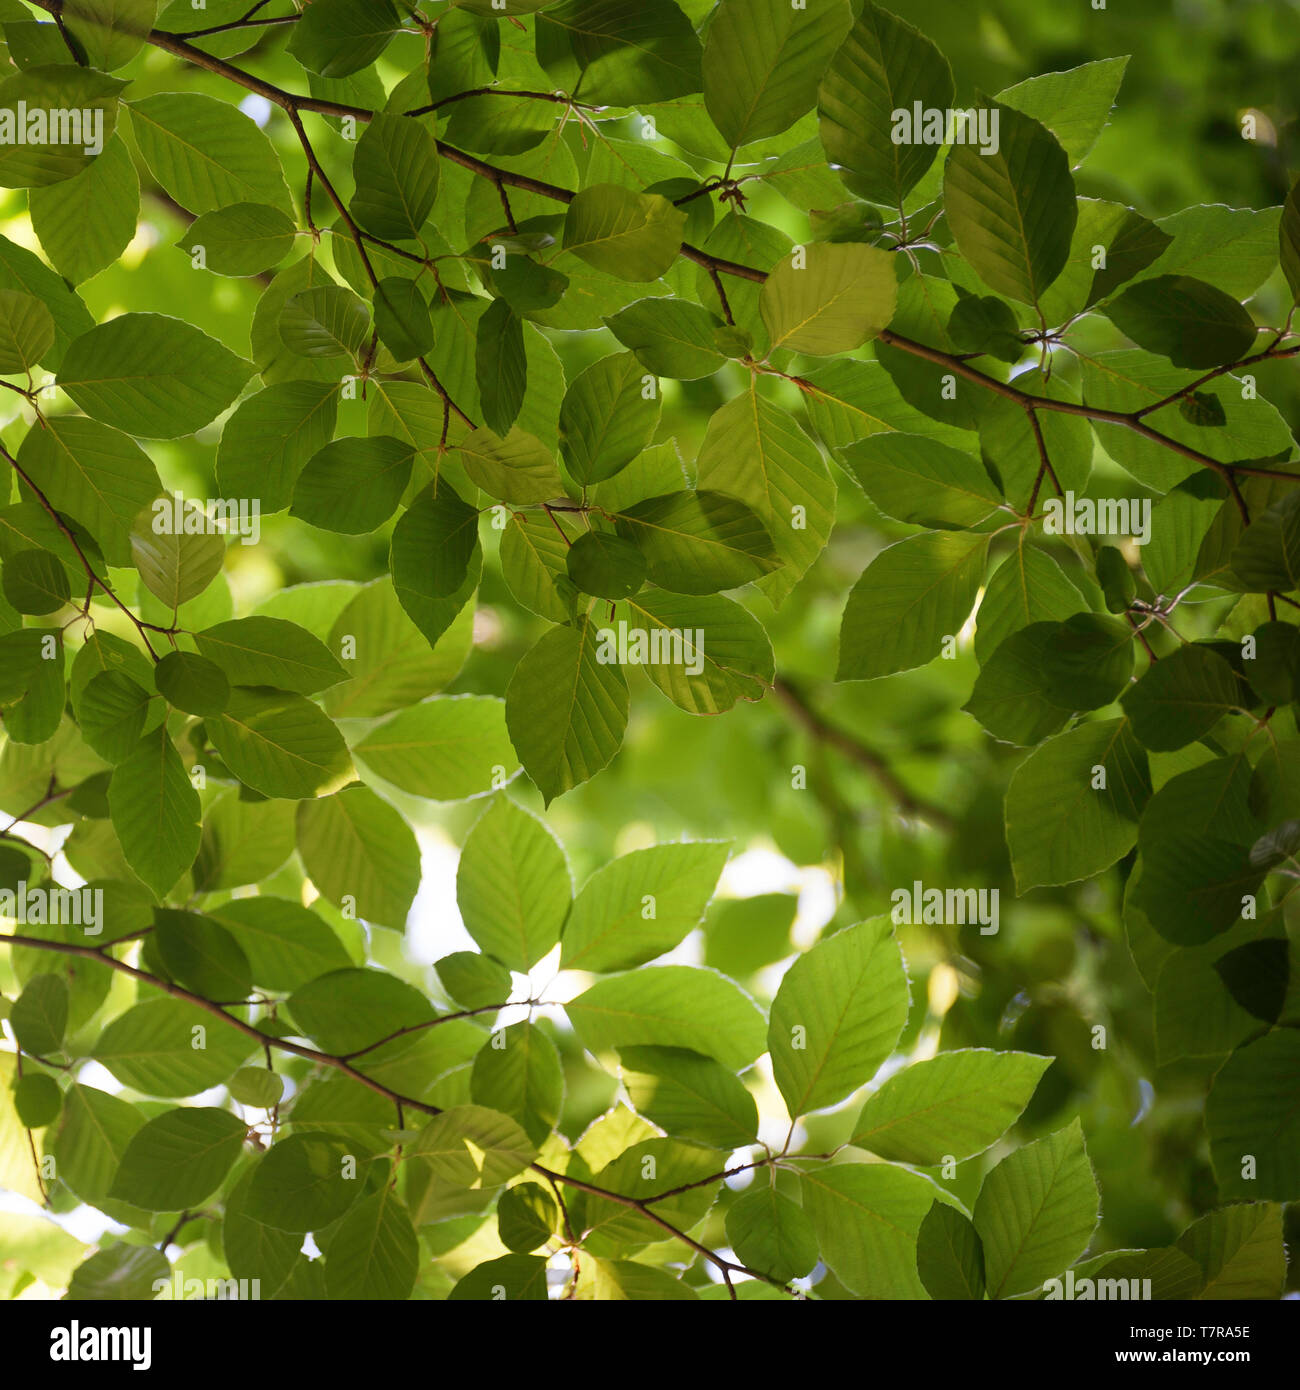 Square green foliage background. Linden tree branches in summer forest. Stock Photo